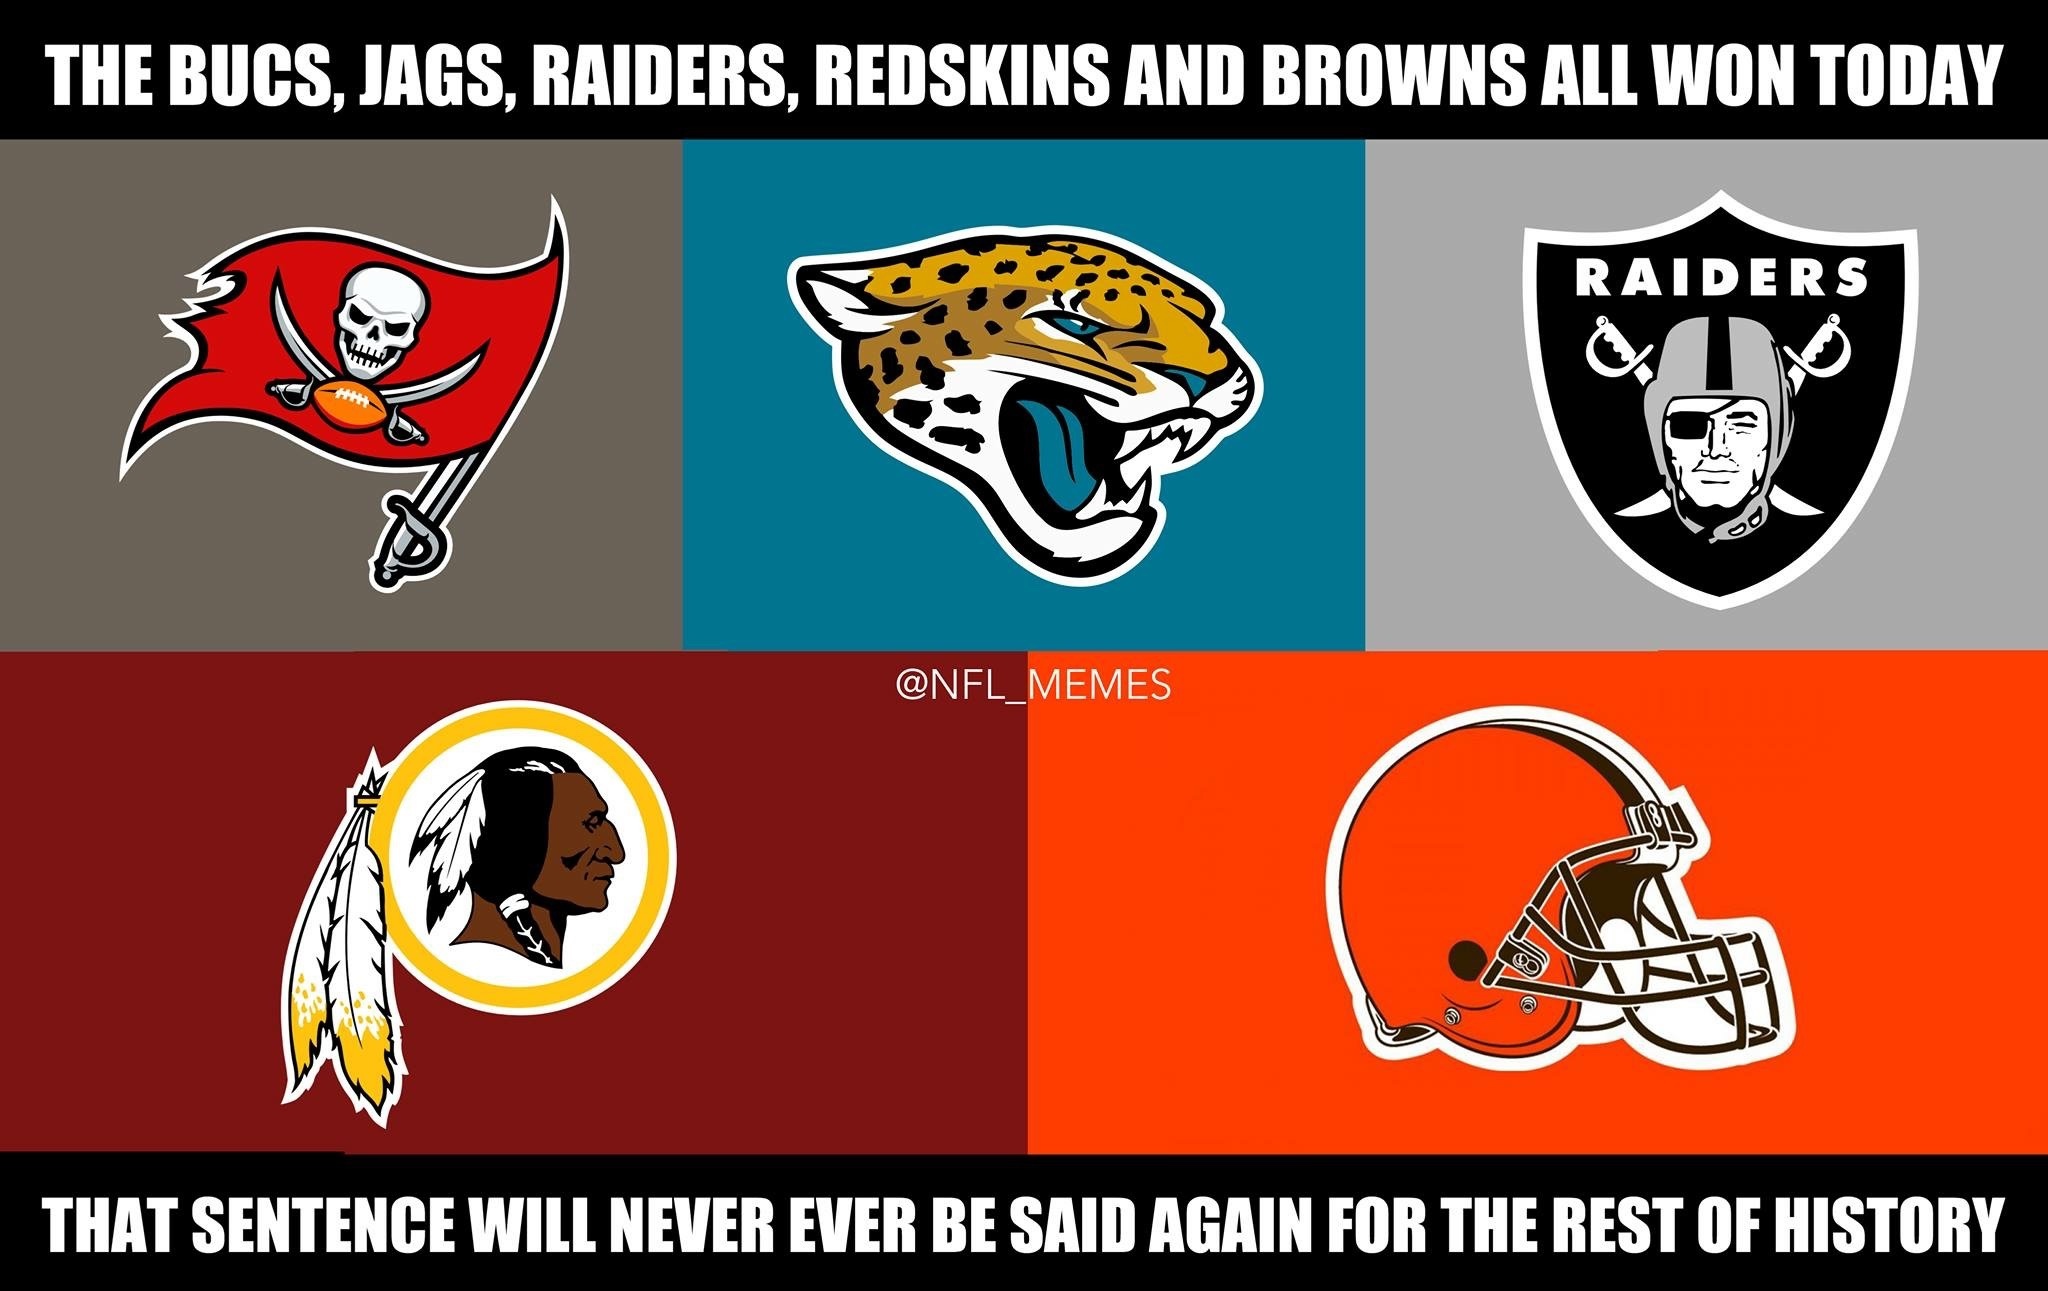 As a New Orleans fan, I am disappoint. What are your guys' teams and how did they do? - meme